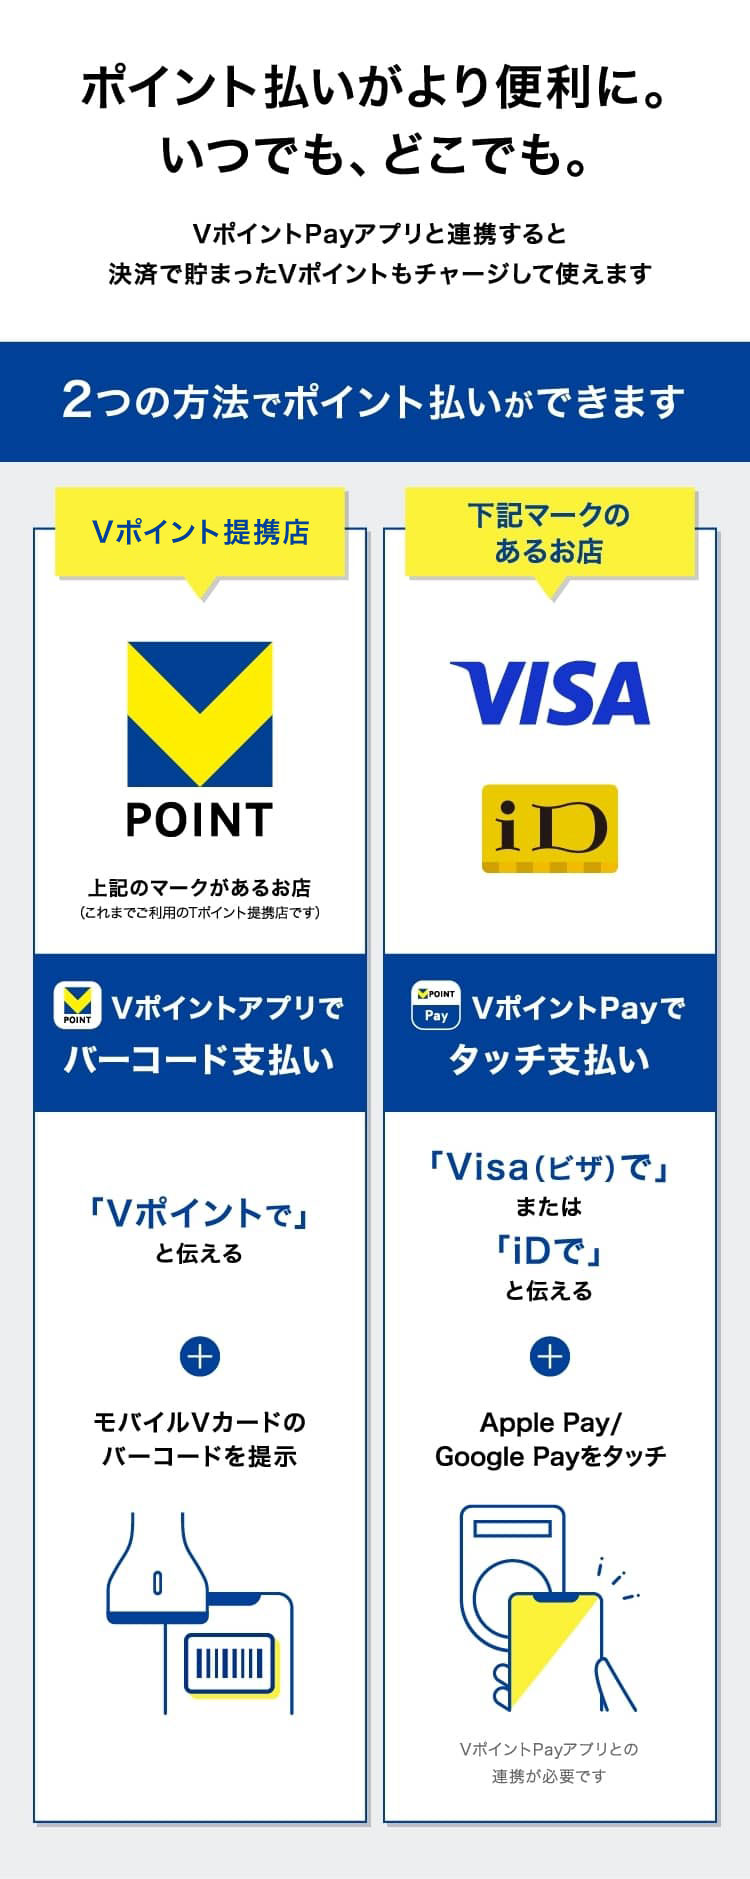 modal-vpoint-pay-1